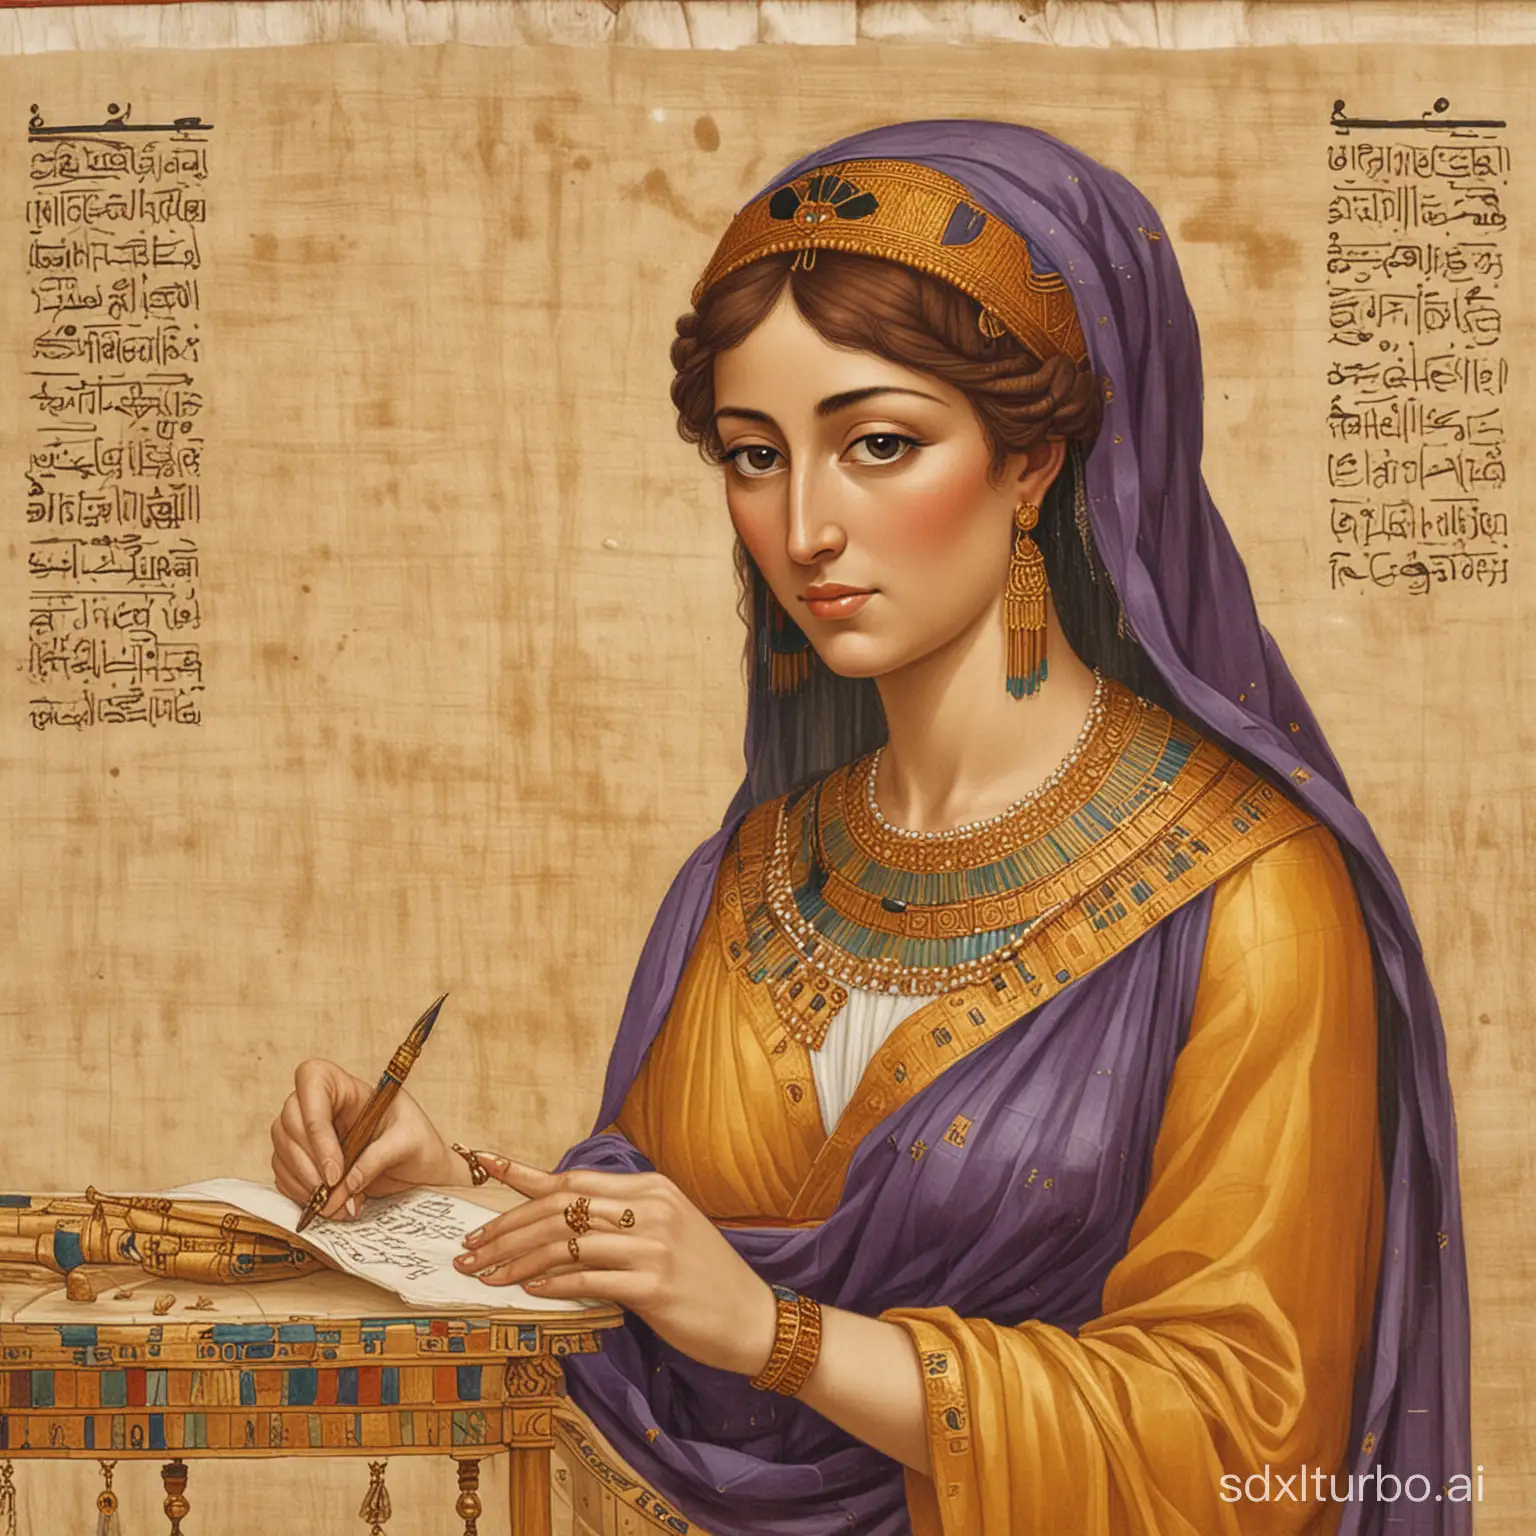 A 35-year-old Ptolemaic queen writing stuff on a papyrus scroll, with reddish-brown hair in a “melon coiffure”, a golden diadem, Hellenistic-style golden earrings with pearls, a white chiton under a purple royal cloak with golden fringes, Hellenistic, Egyptian, photographic